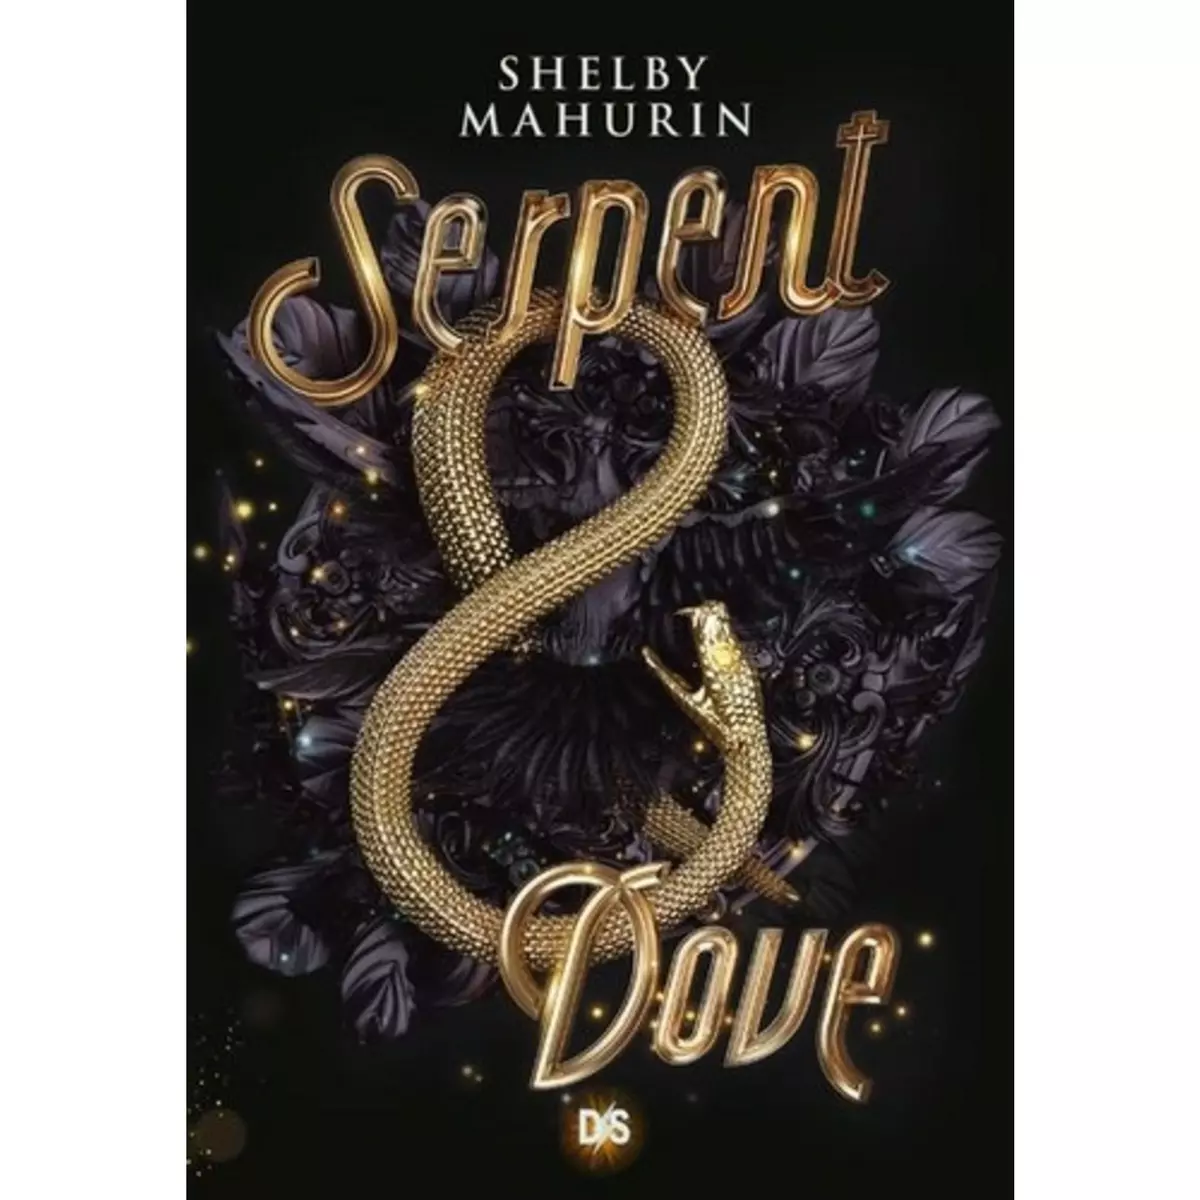  SERPENT & DOVE TOME 1 , Mahurin Shelby